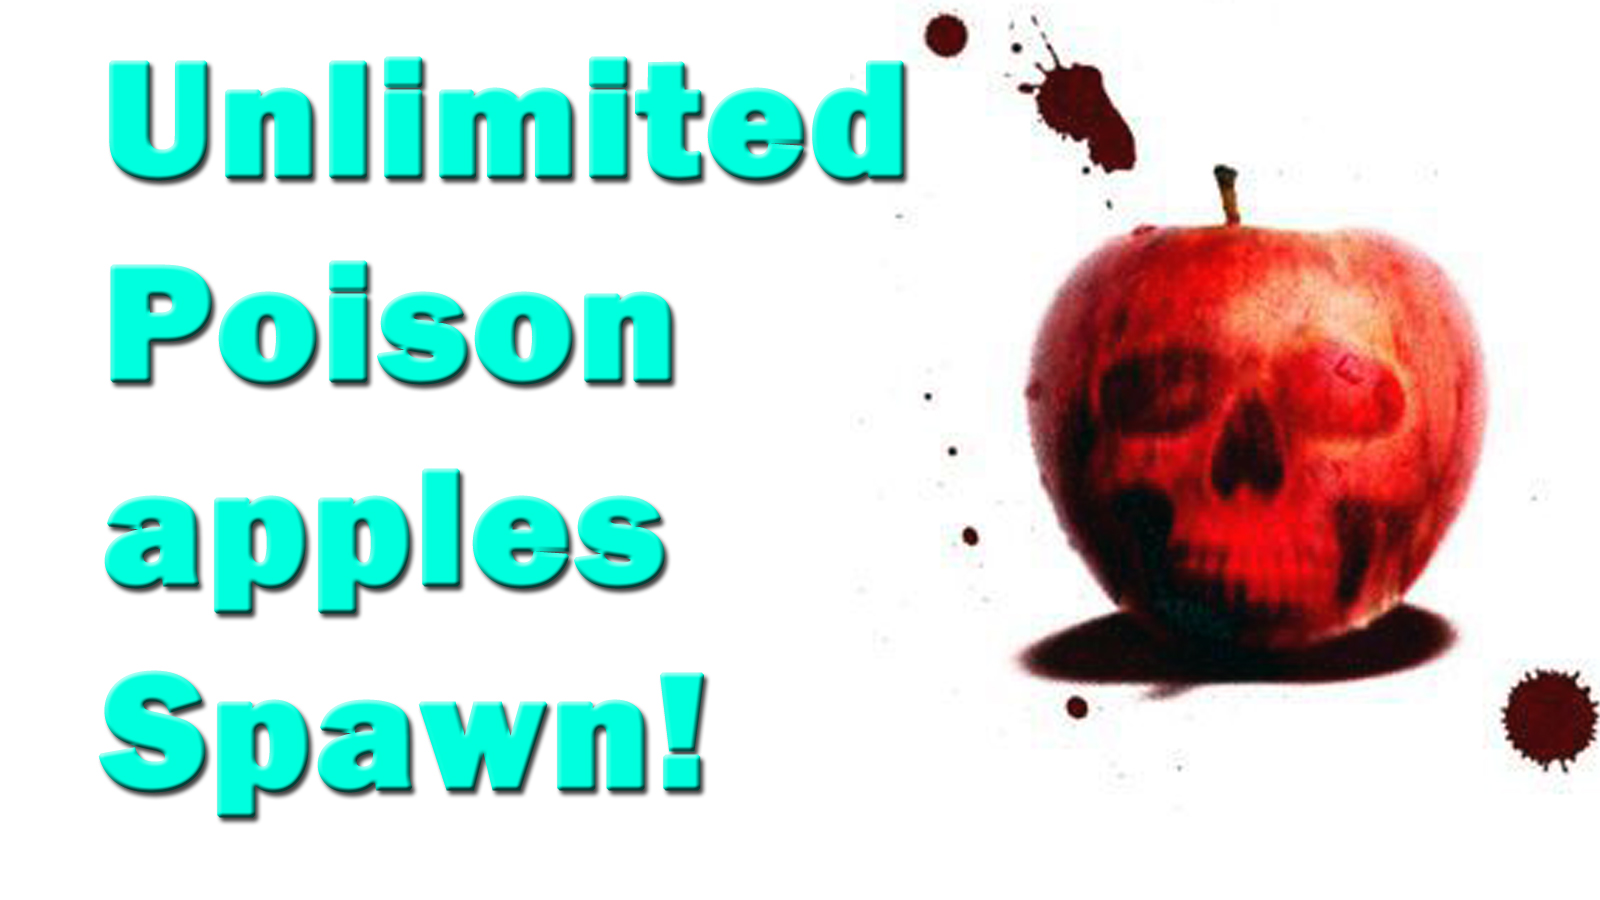 Unlimited Poison Apples and cash - For your own Twisted Entertainment! for The Elder Scrolls IV: Oblivion